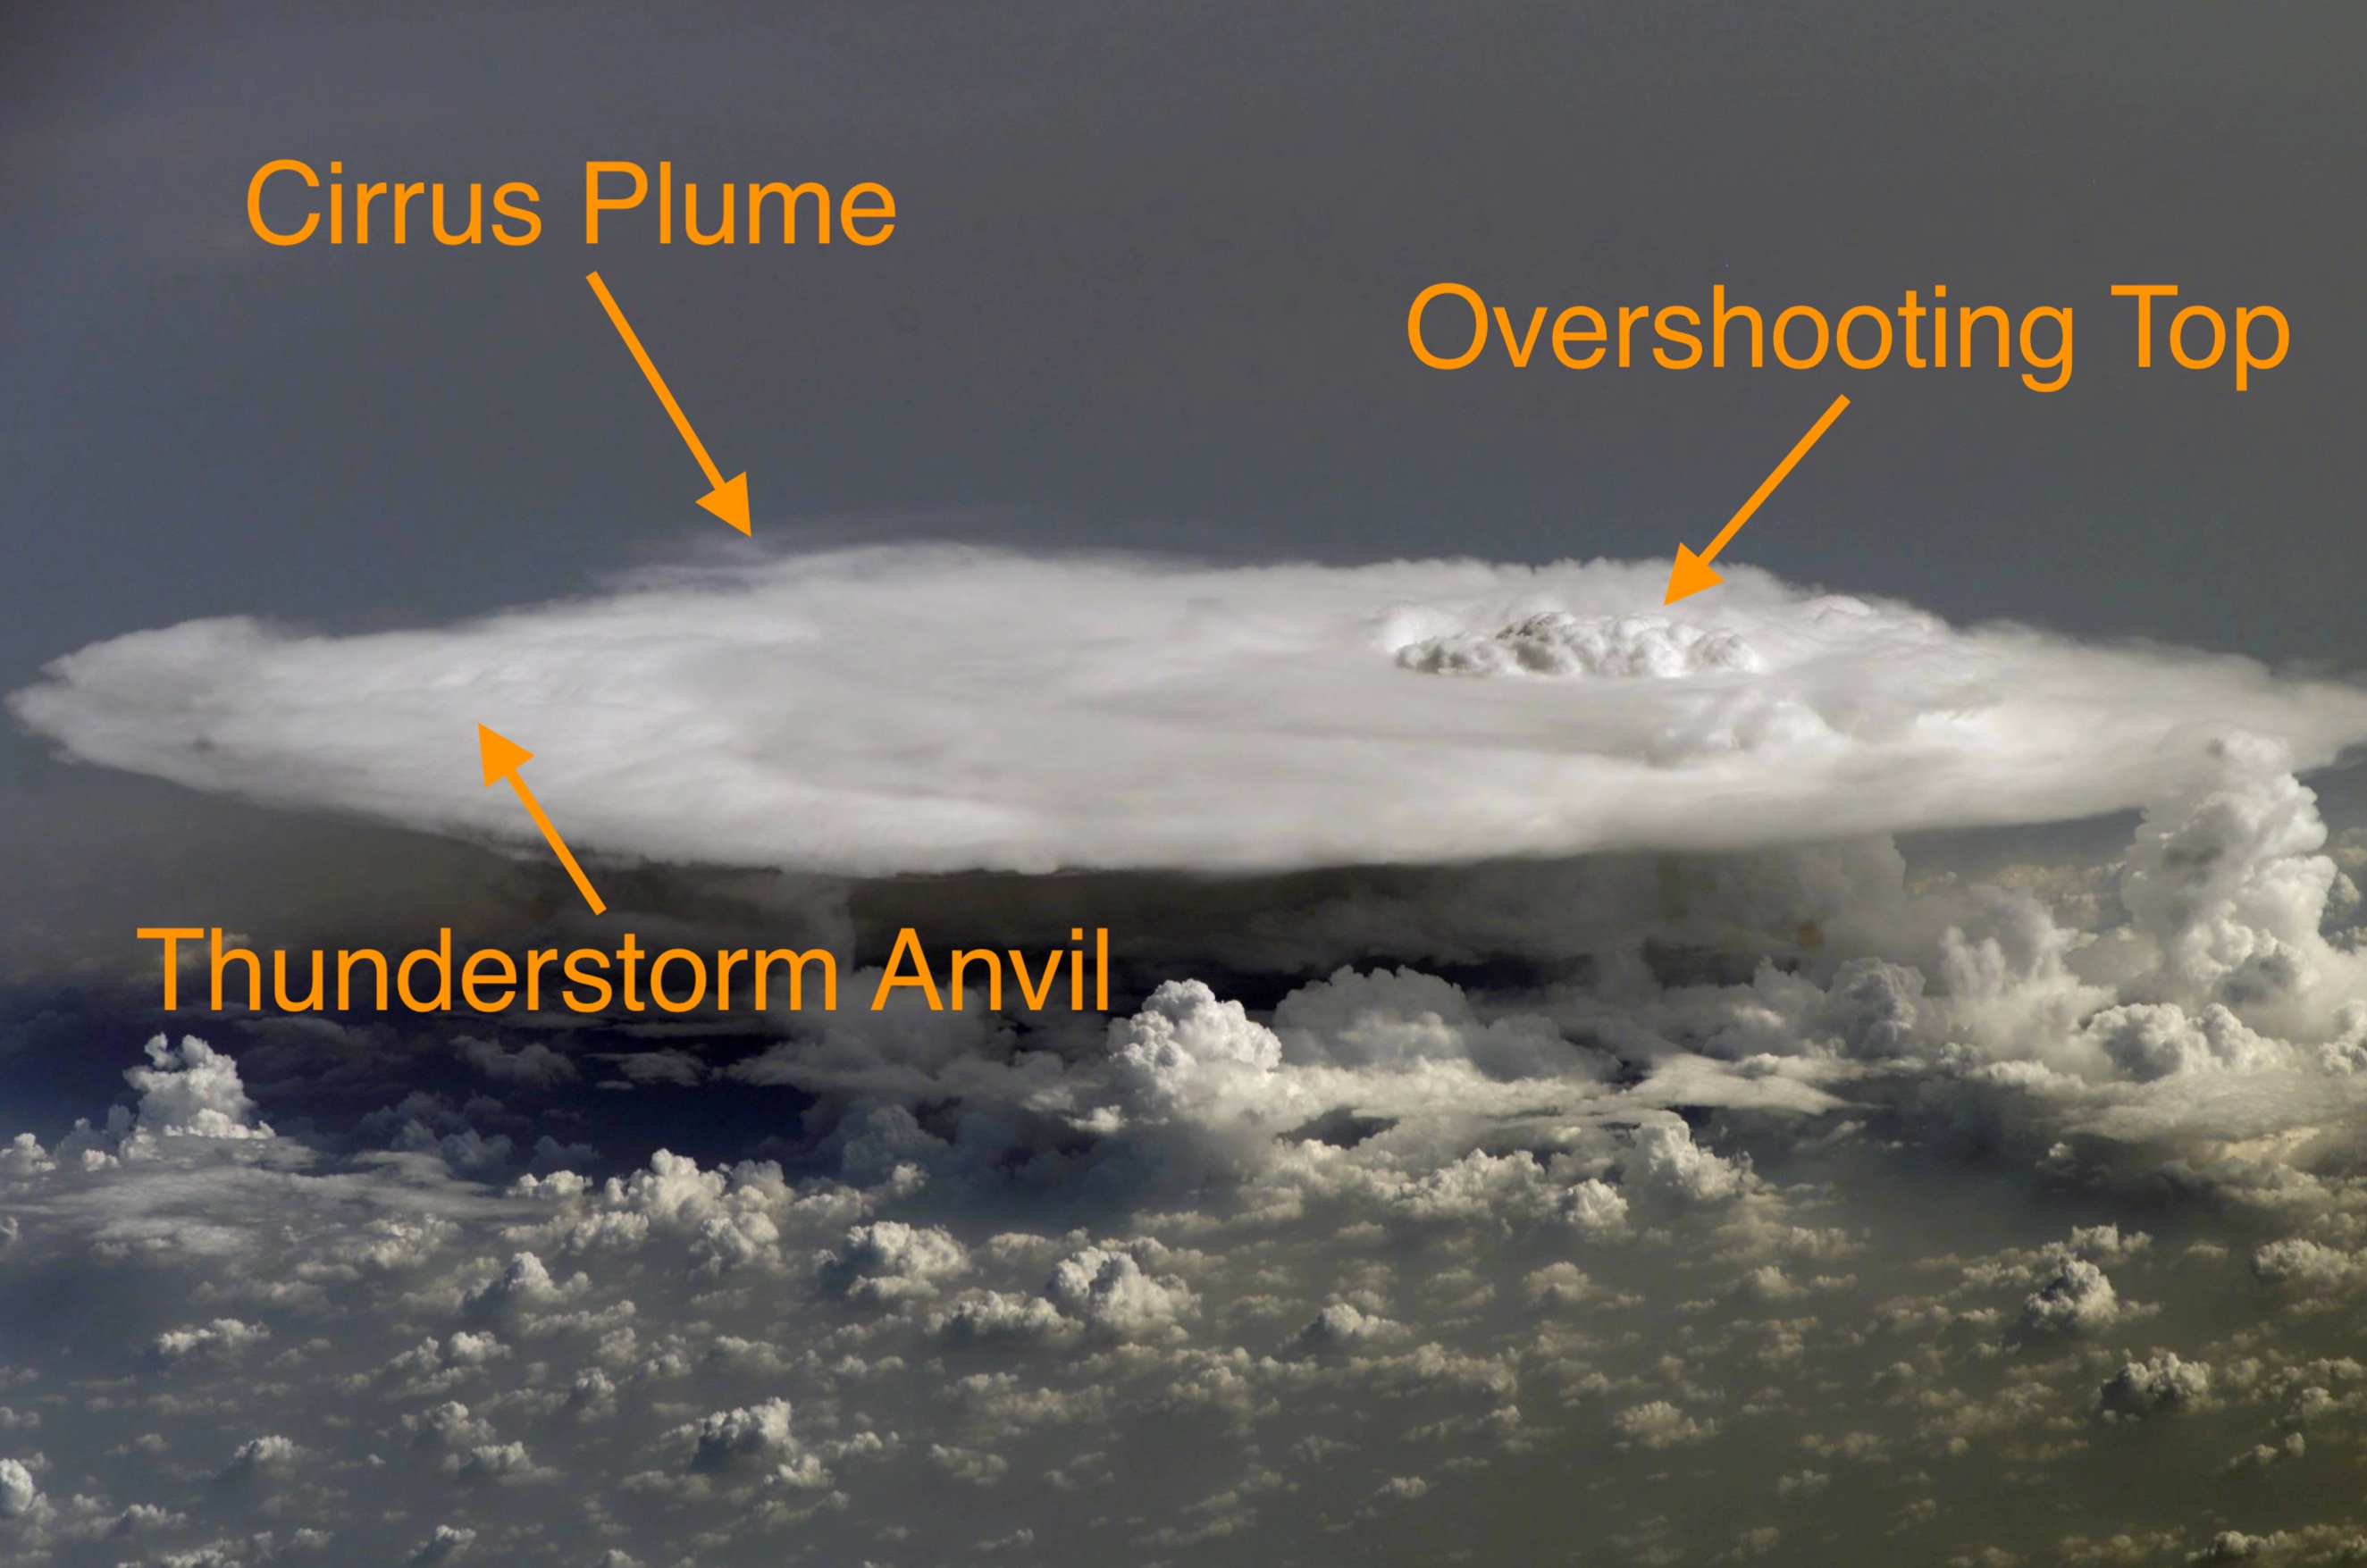 This image is a photograph from the International Space Station of an intense overshooting convective storm with a cirrus plume in the lower stratosphere.